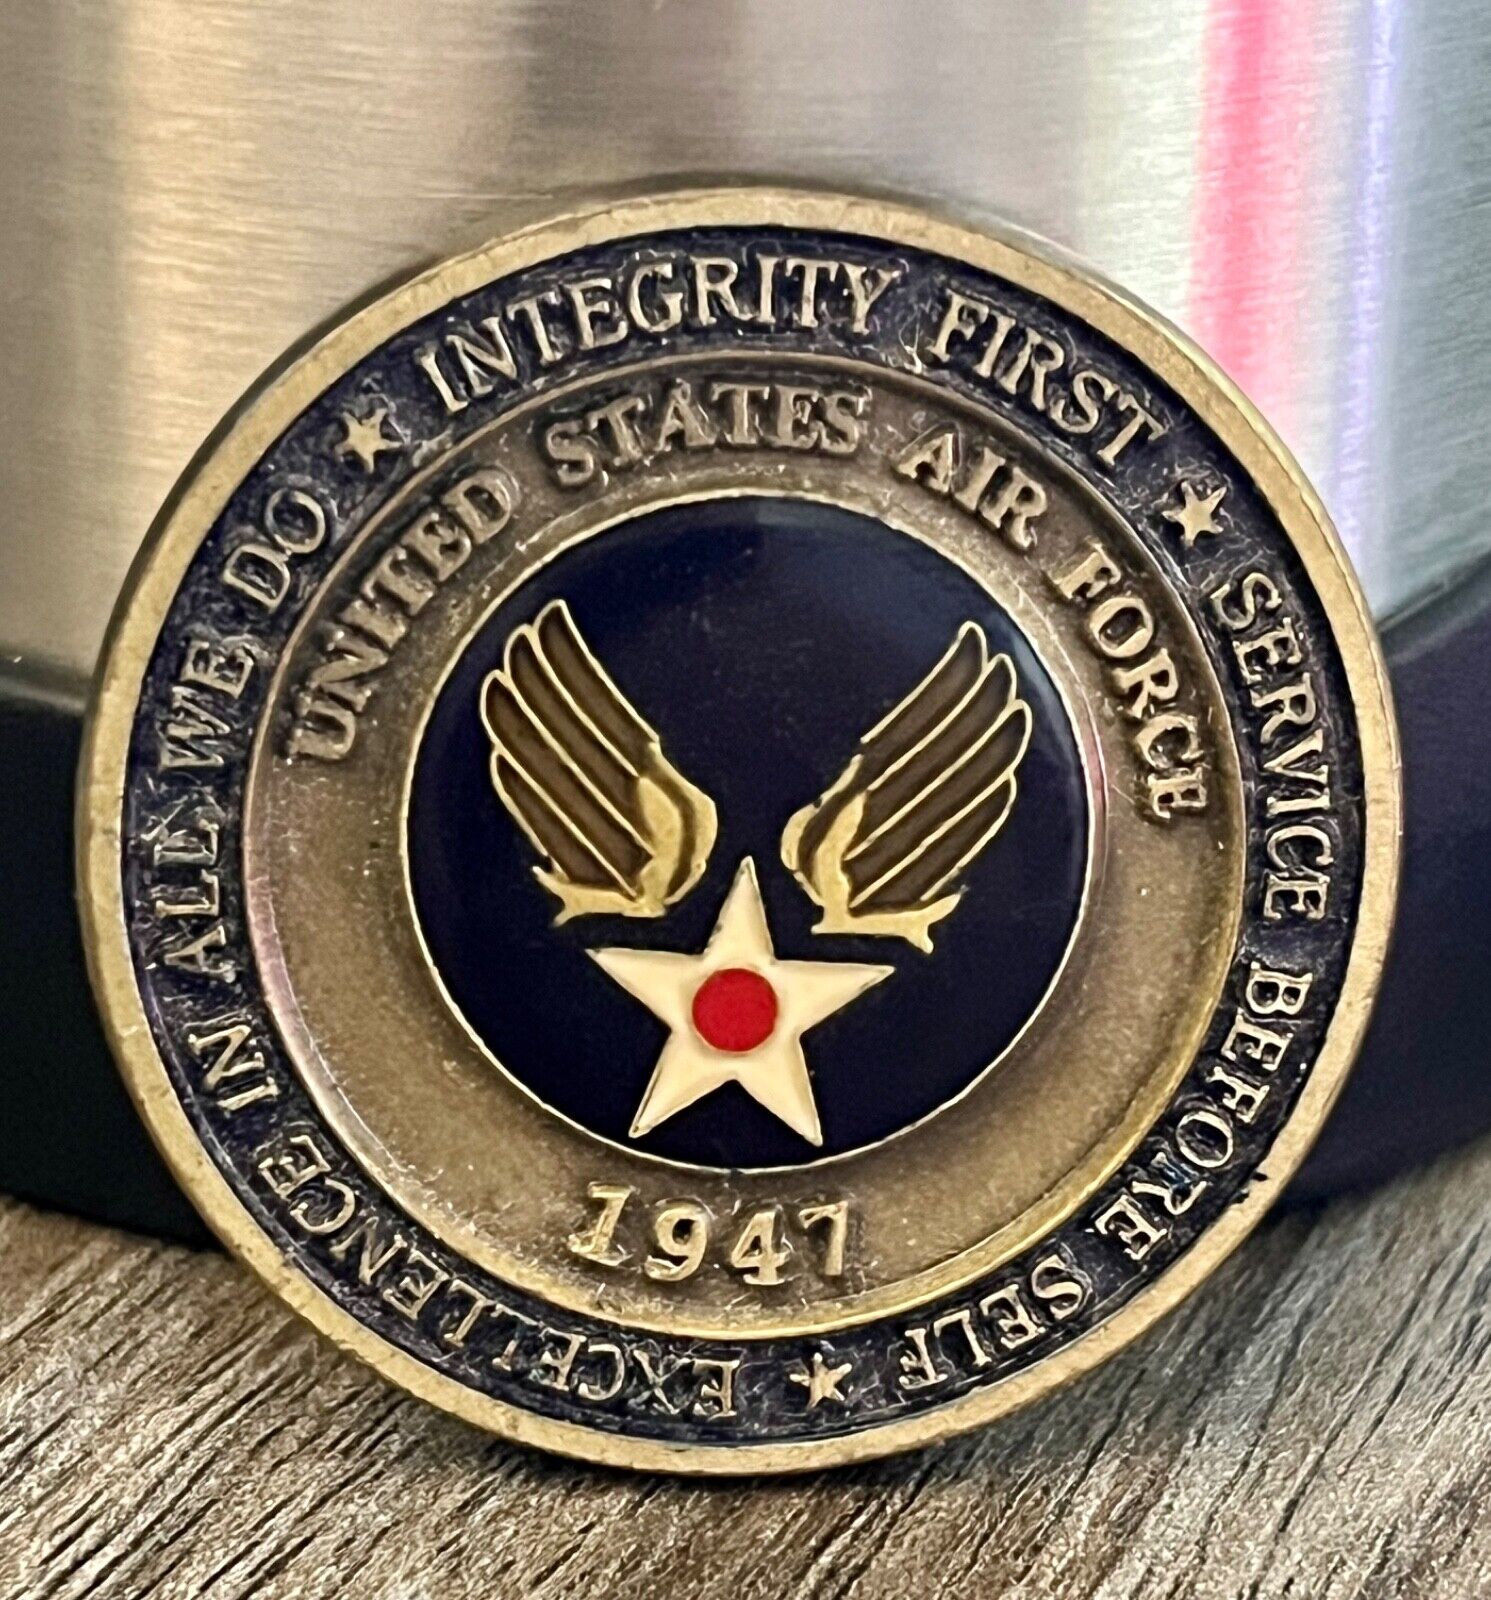 Authentic USAF Airman’s Coin